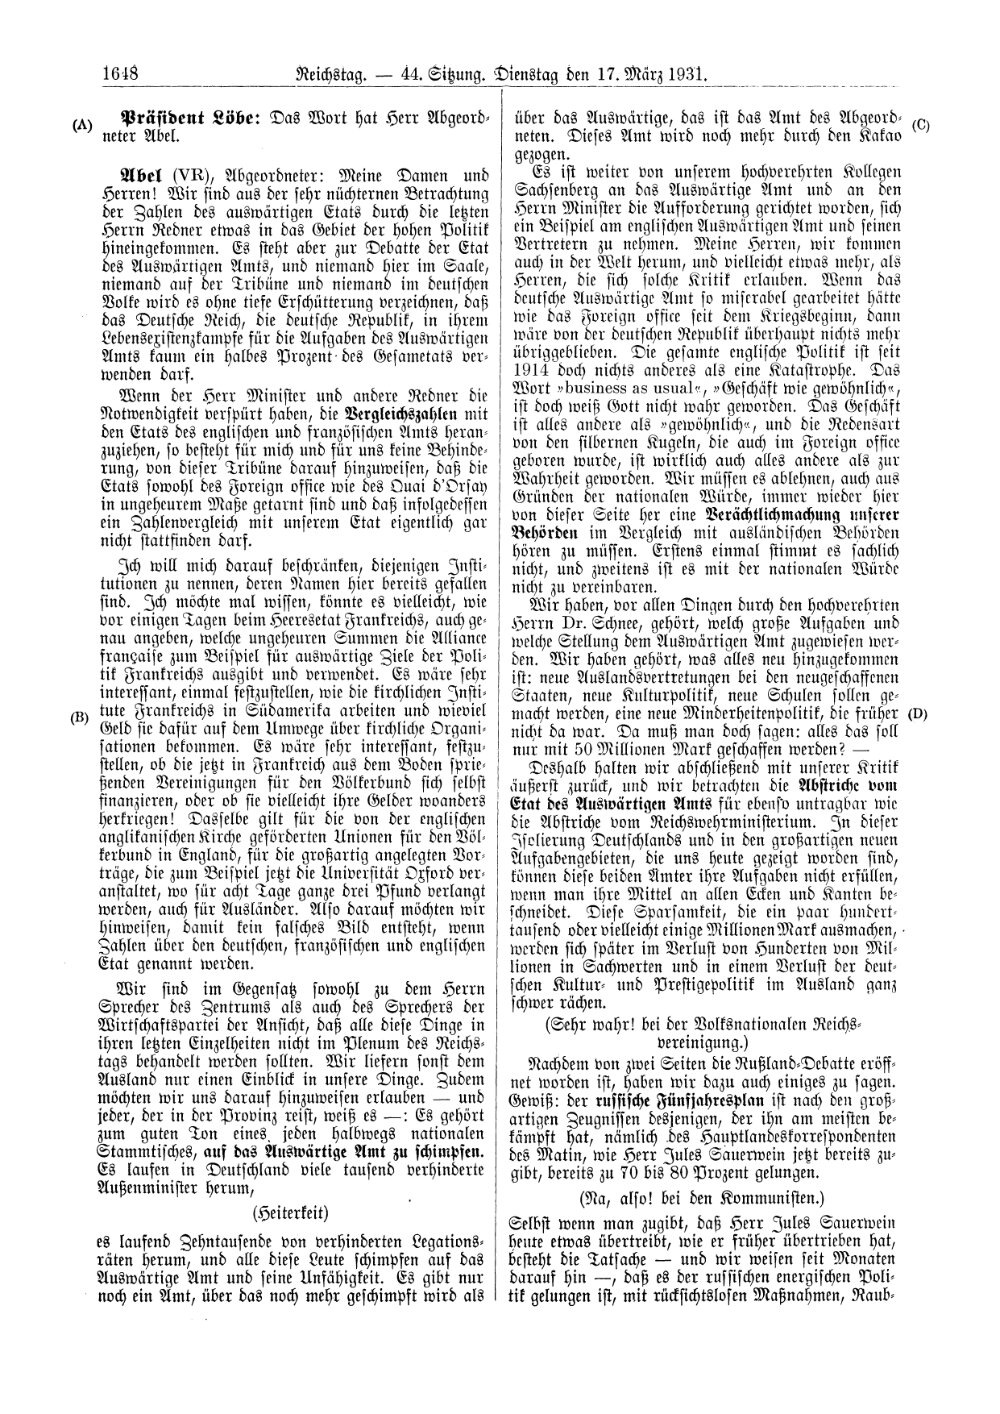 Scan of page 1648